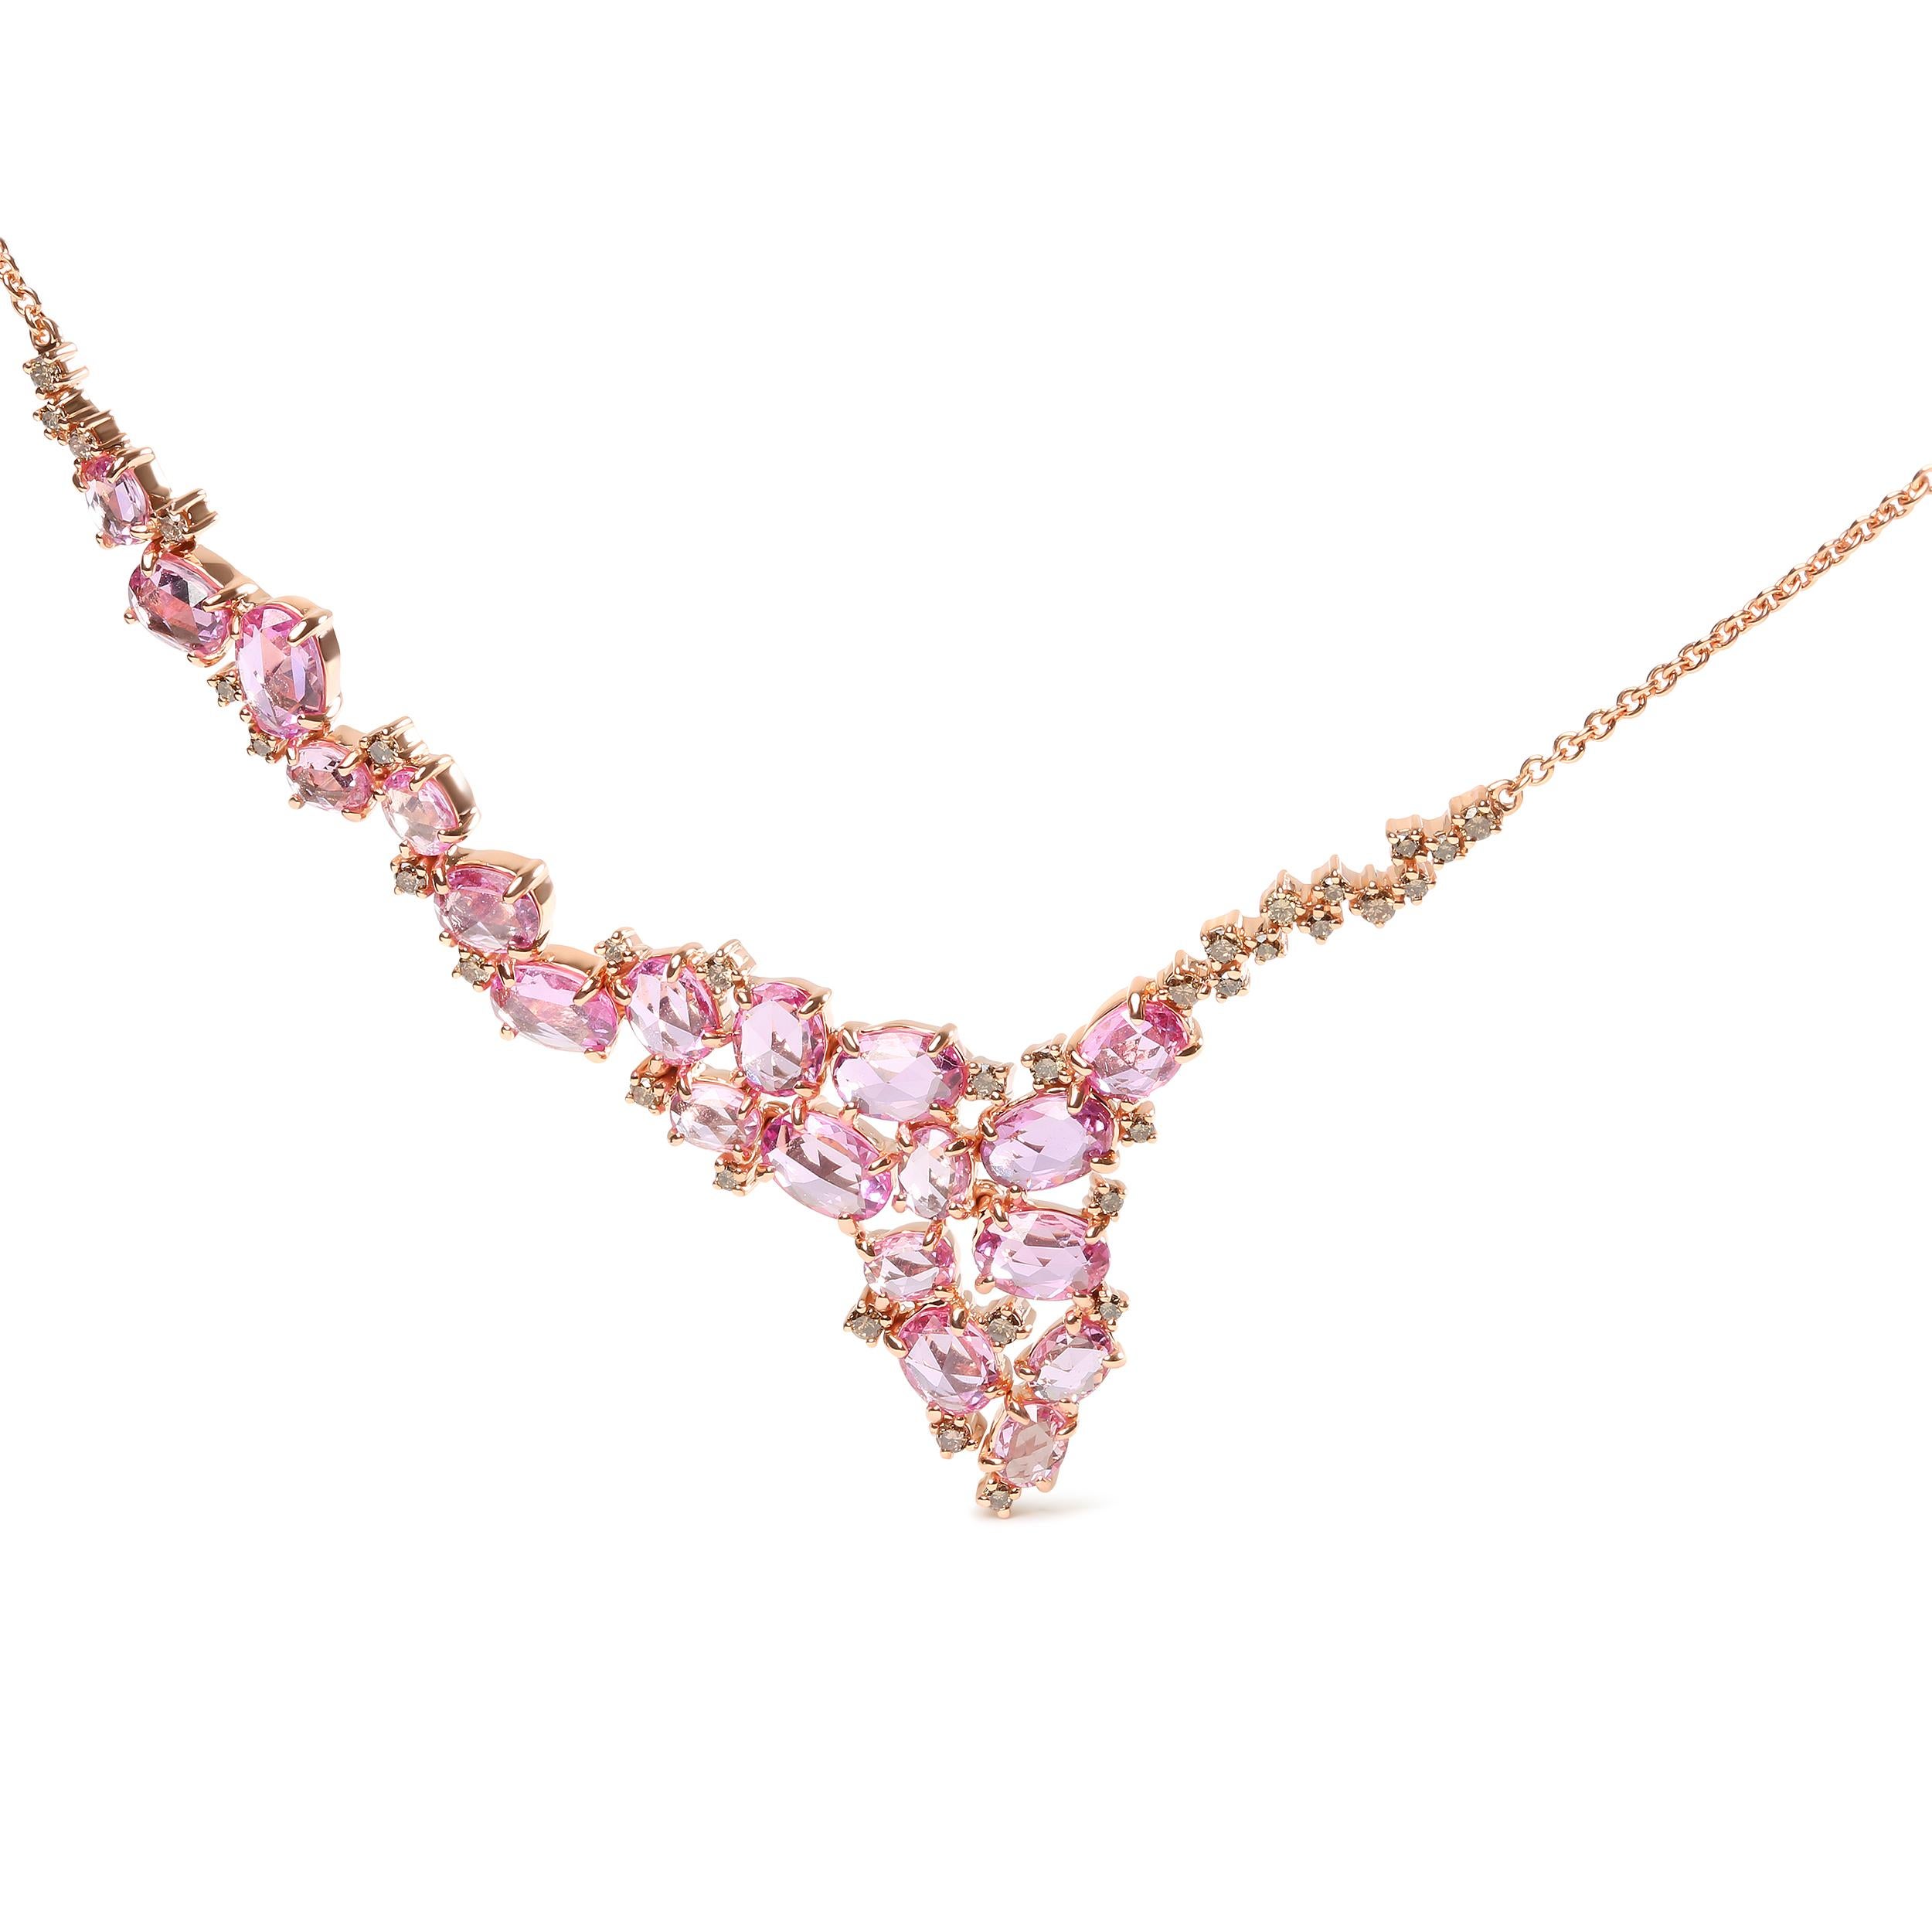 Placing an emphasis in sparkle, this cluster cascade station necklace dazzled in polished 18k rose gold with natural gemstones and diamonds. A unique arrangement of heat-treated pink sapphires in 8x5mm, 5x5mm, and 4x4mm ovals are scattered in a